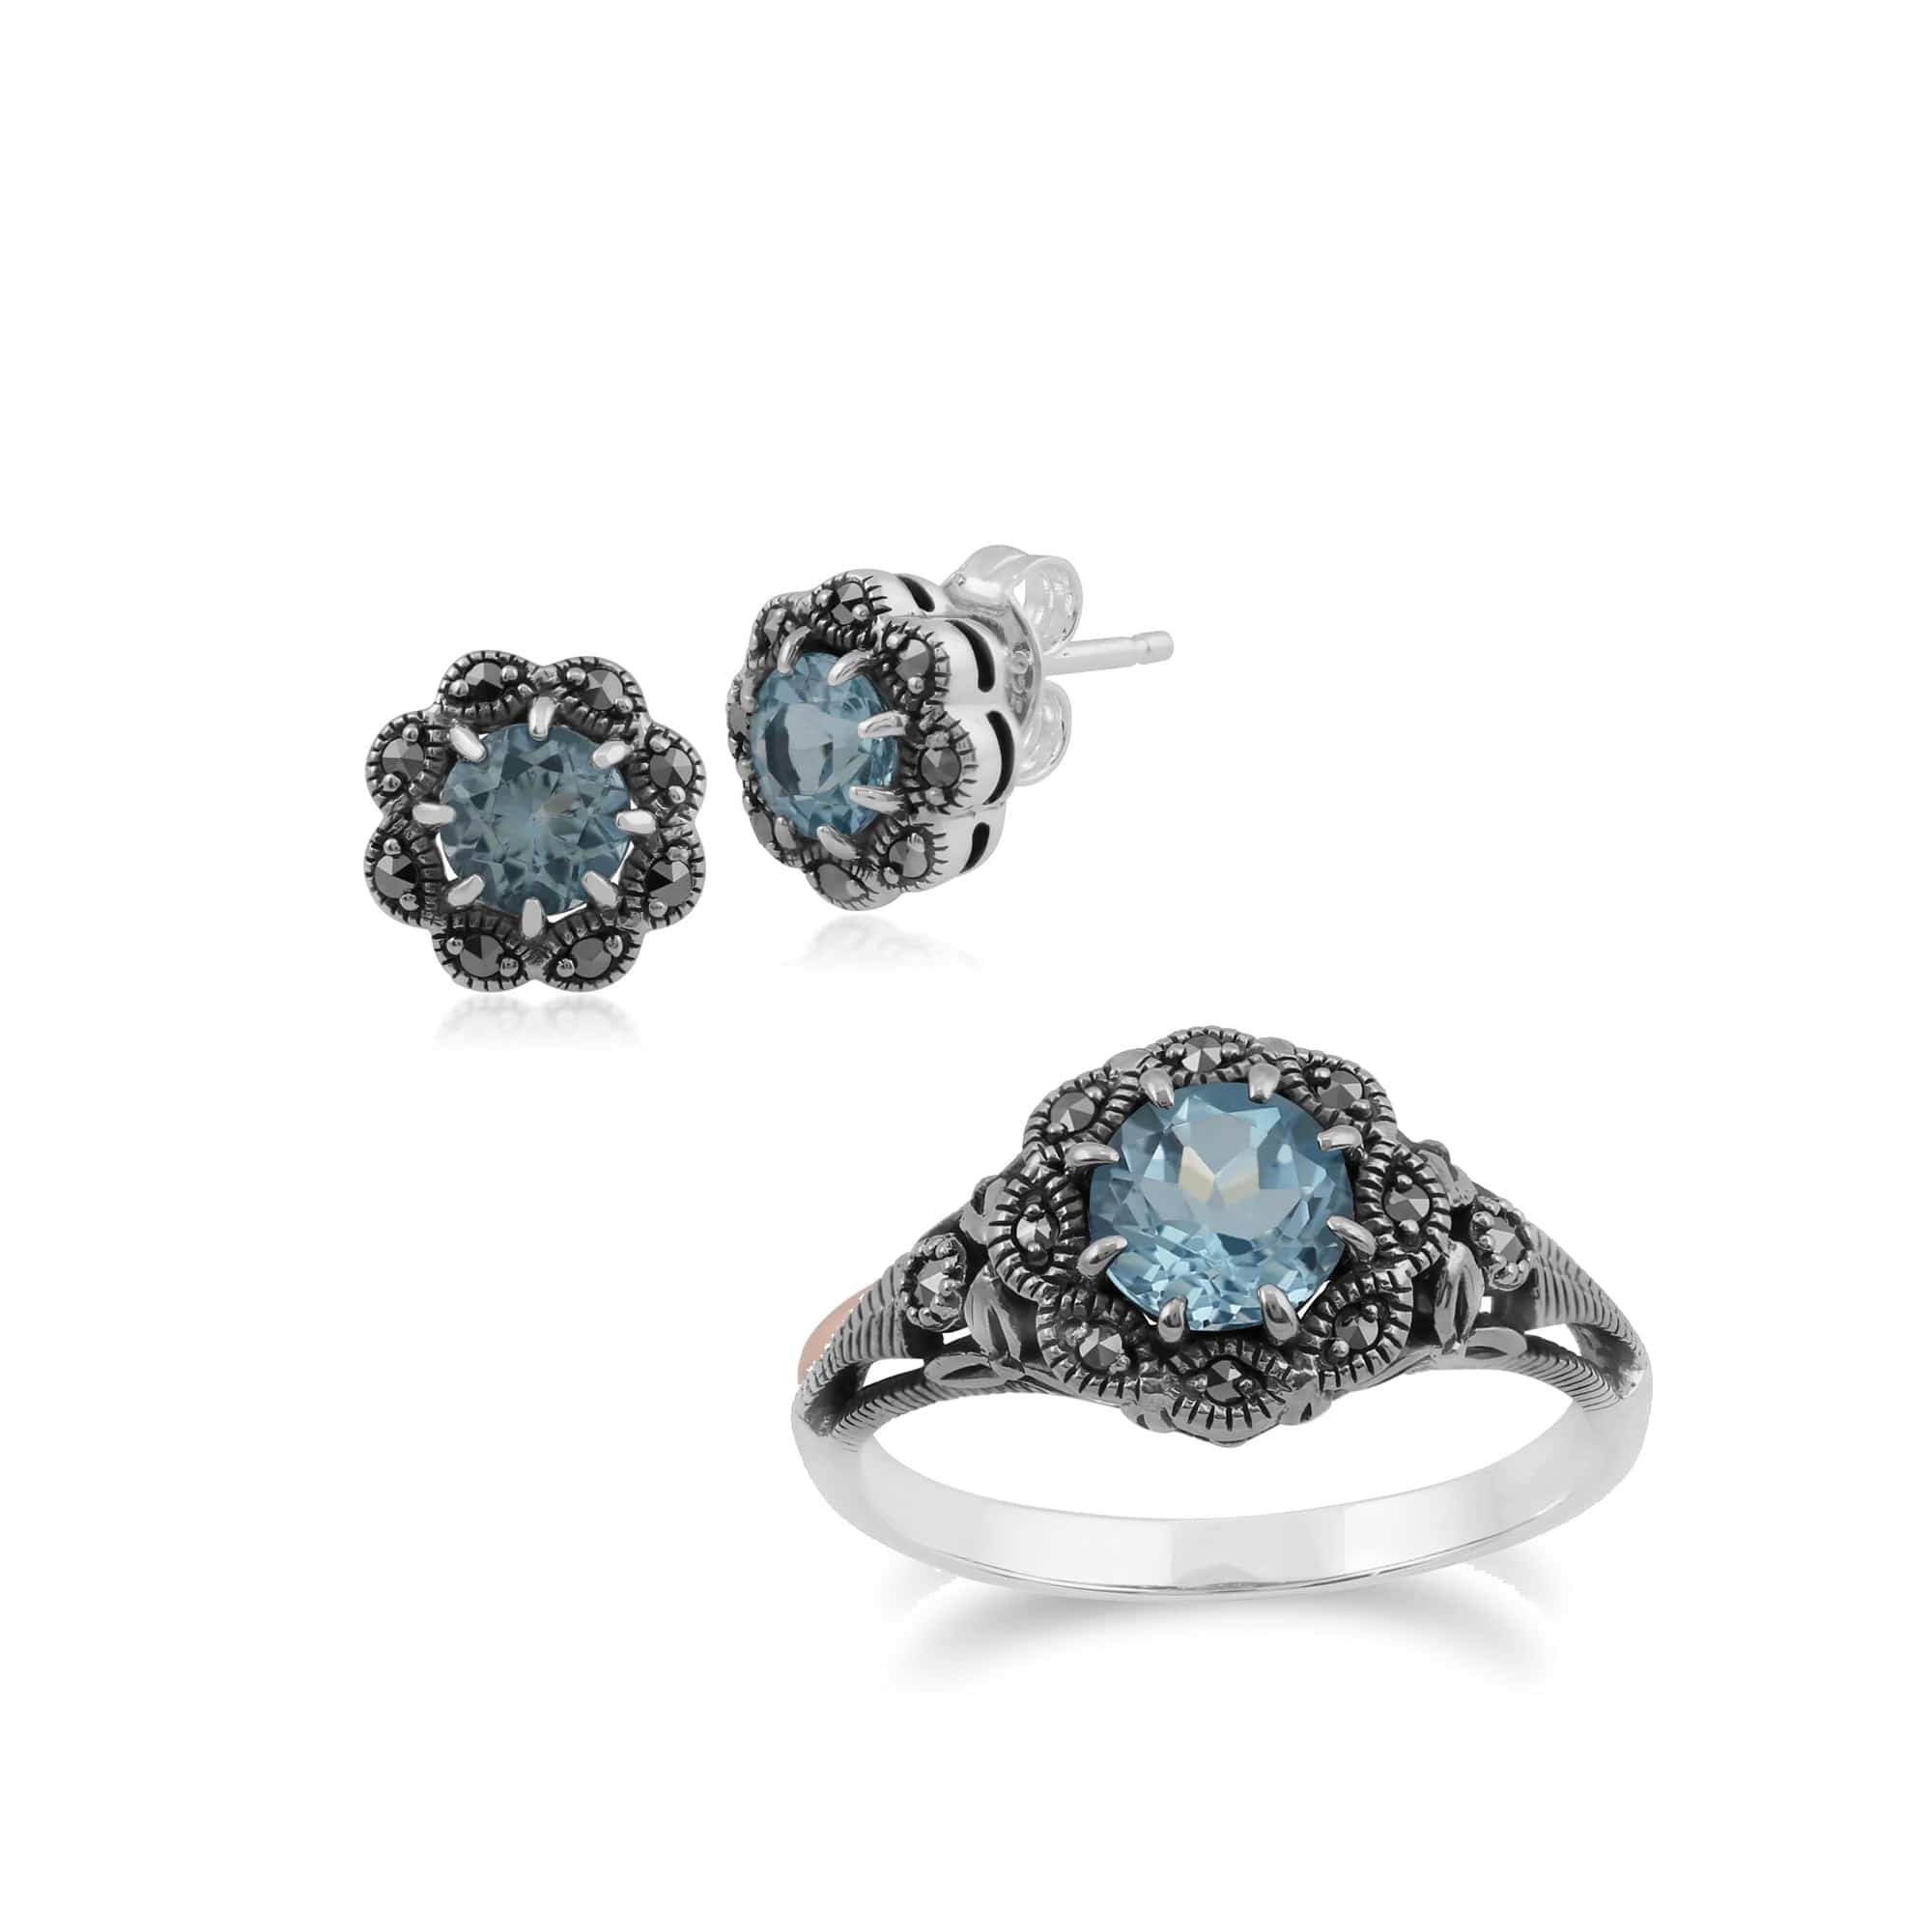 214E731504925-214R524704925 Art Nouveau Style Style Round Blue Topaz & Marcasite Floral Stud Earrings & Ring Set in 925 Sterling Silver 1